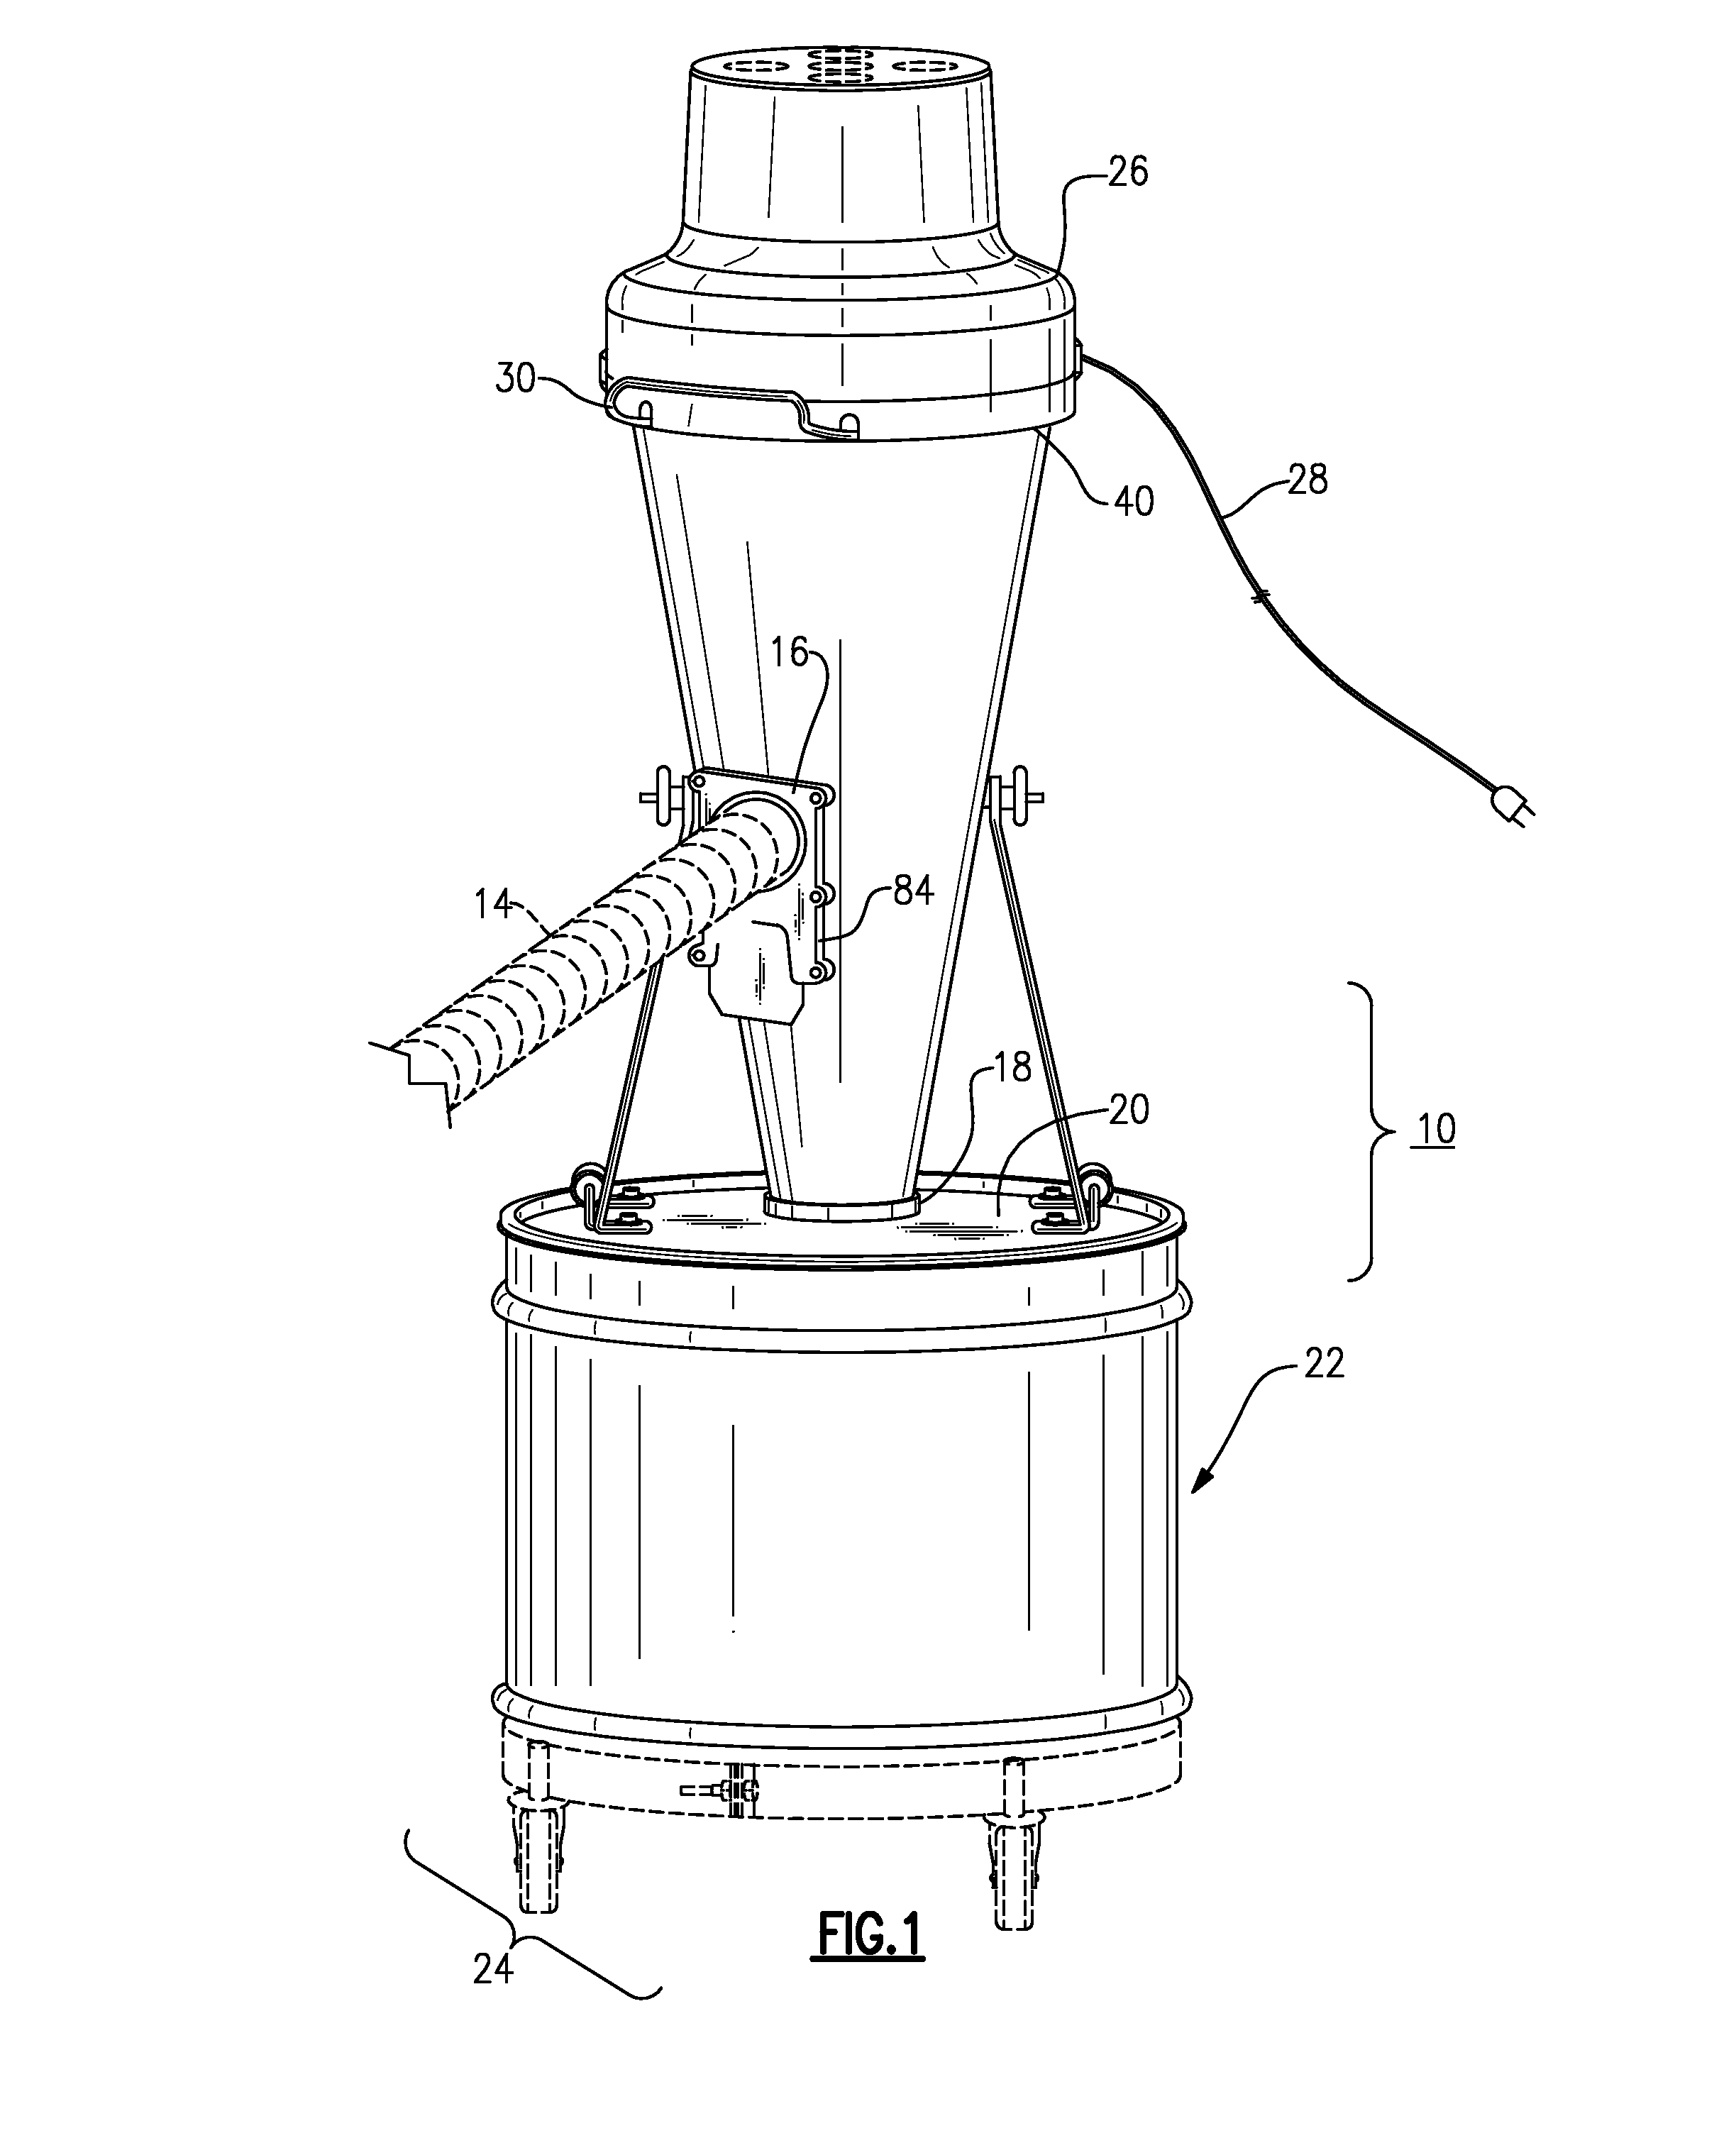 Deflagration suppression screen for portable cyclonic dust collector/vacuum cleaner